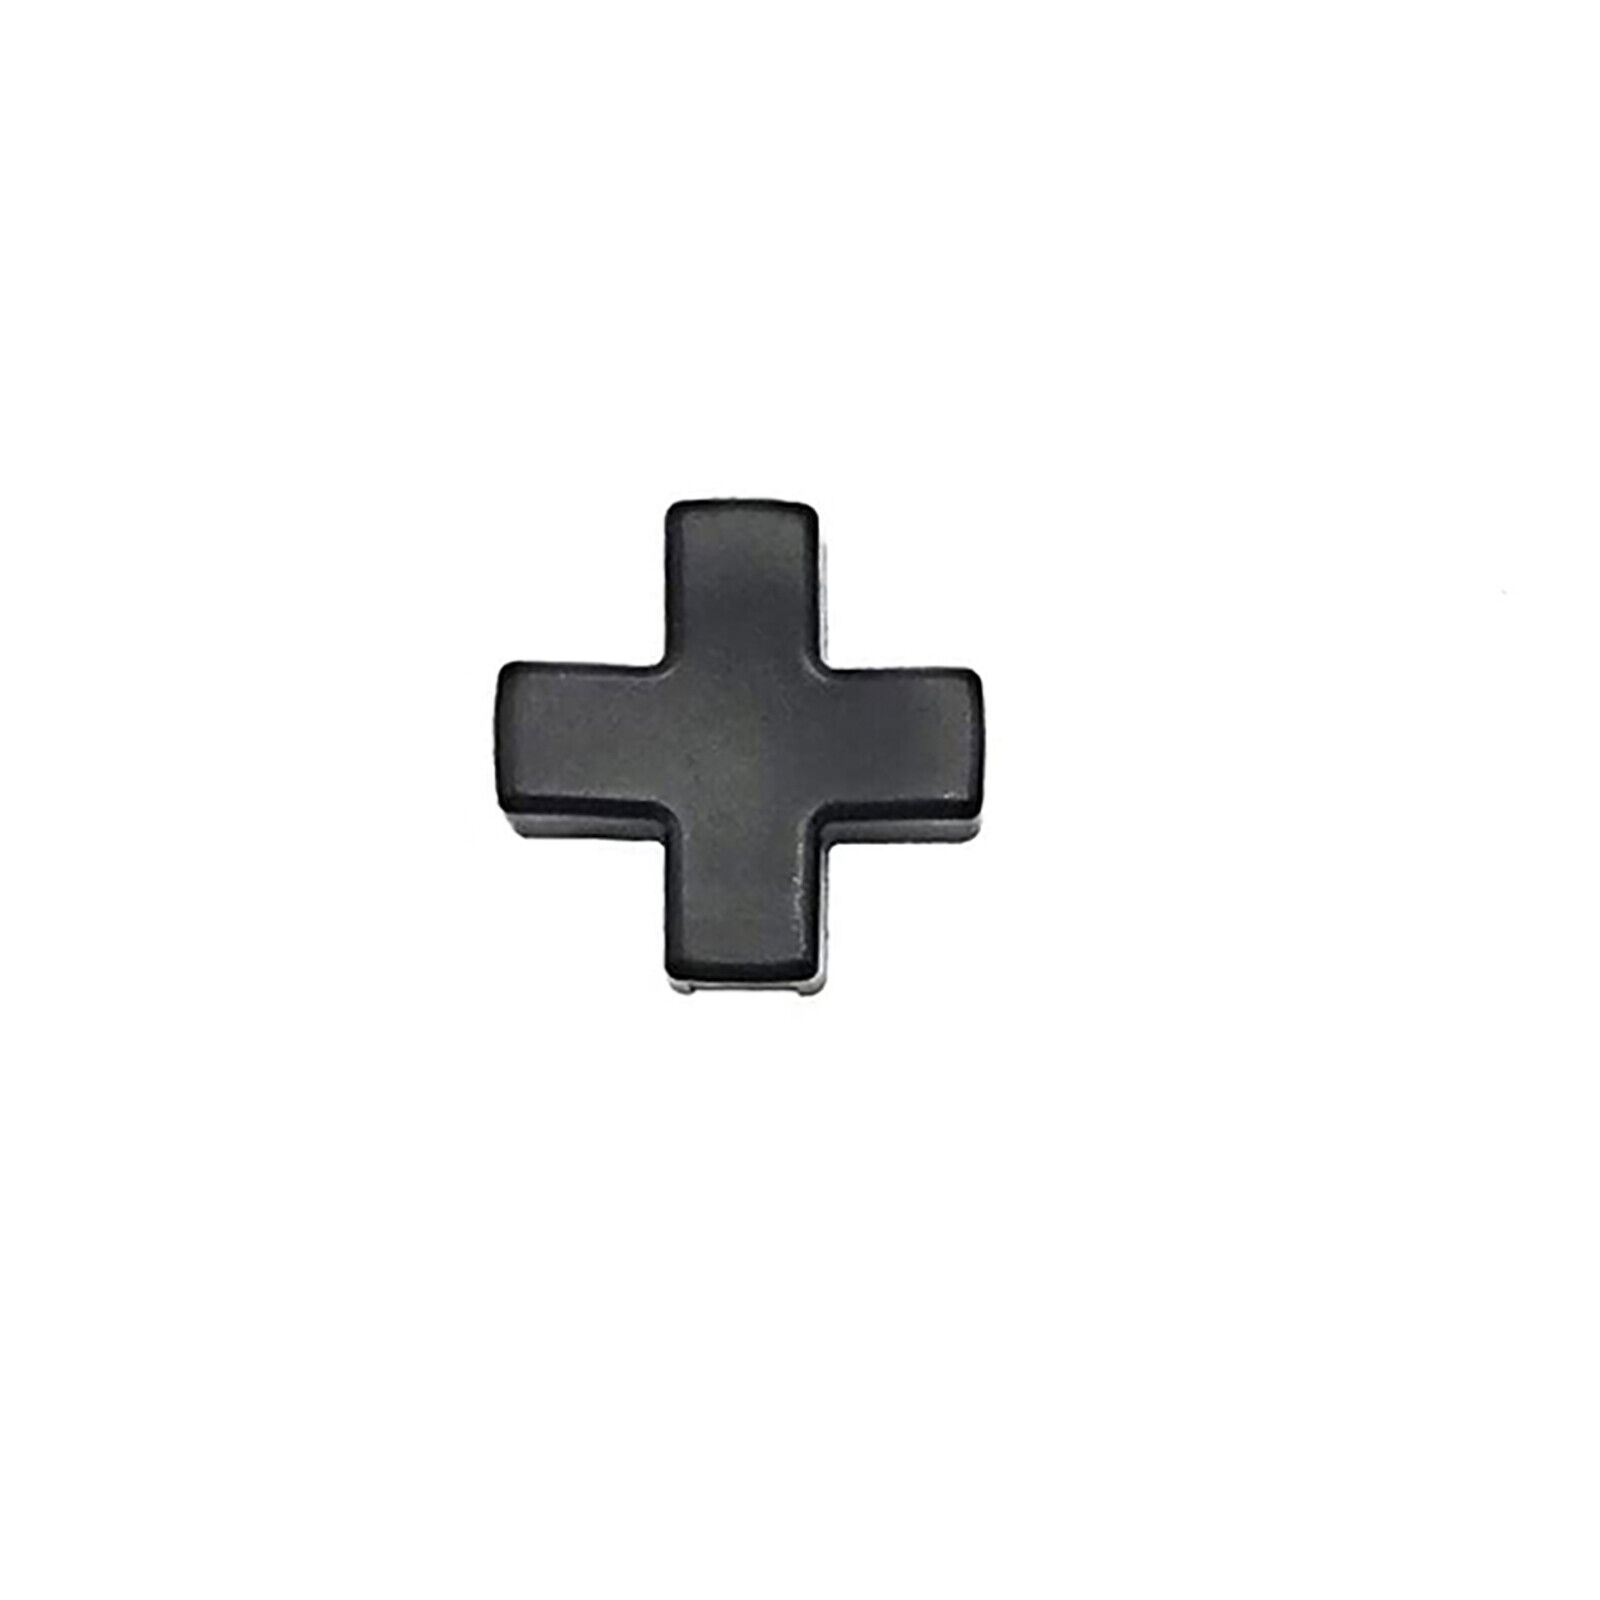 Cross Key Round Cross Key Parts for XBOX One Elite Controller Series 1  Series 2